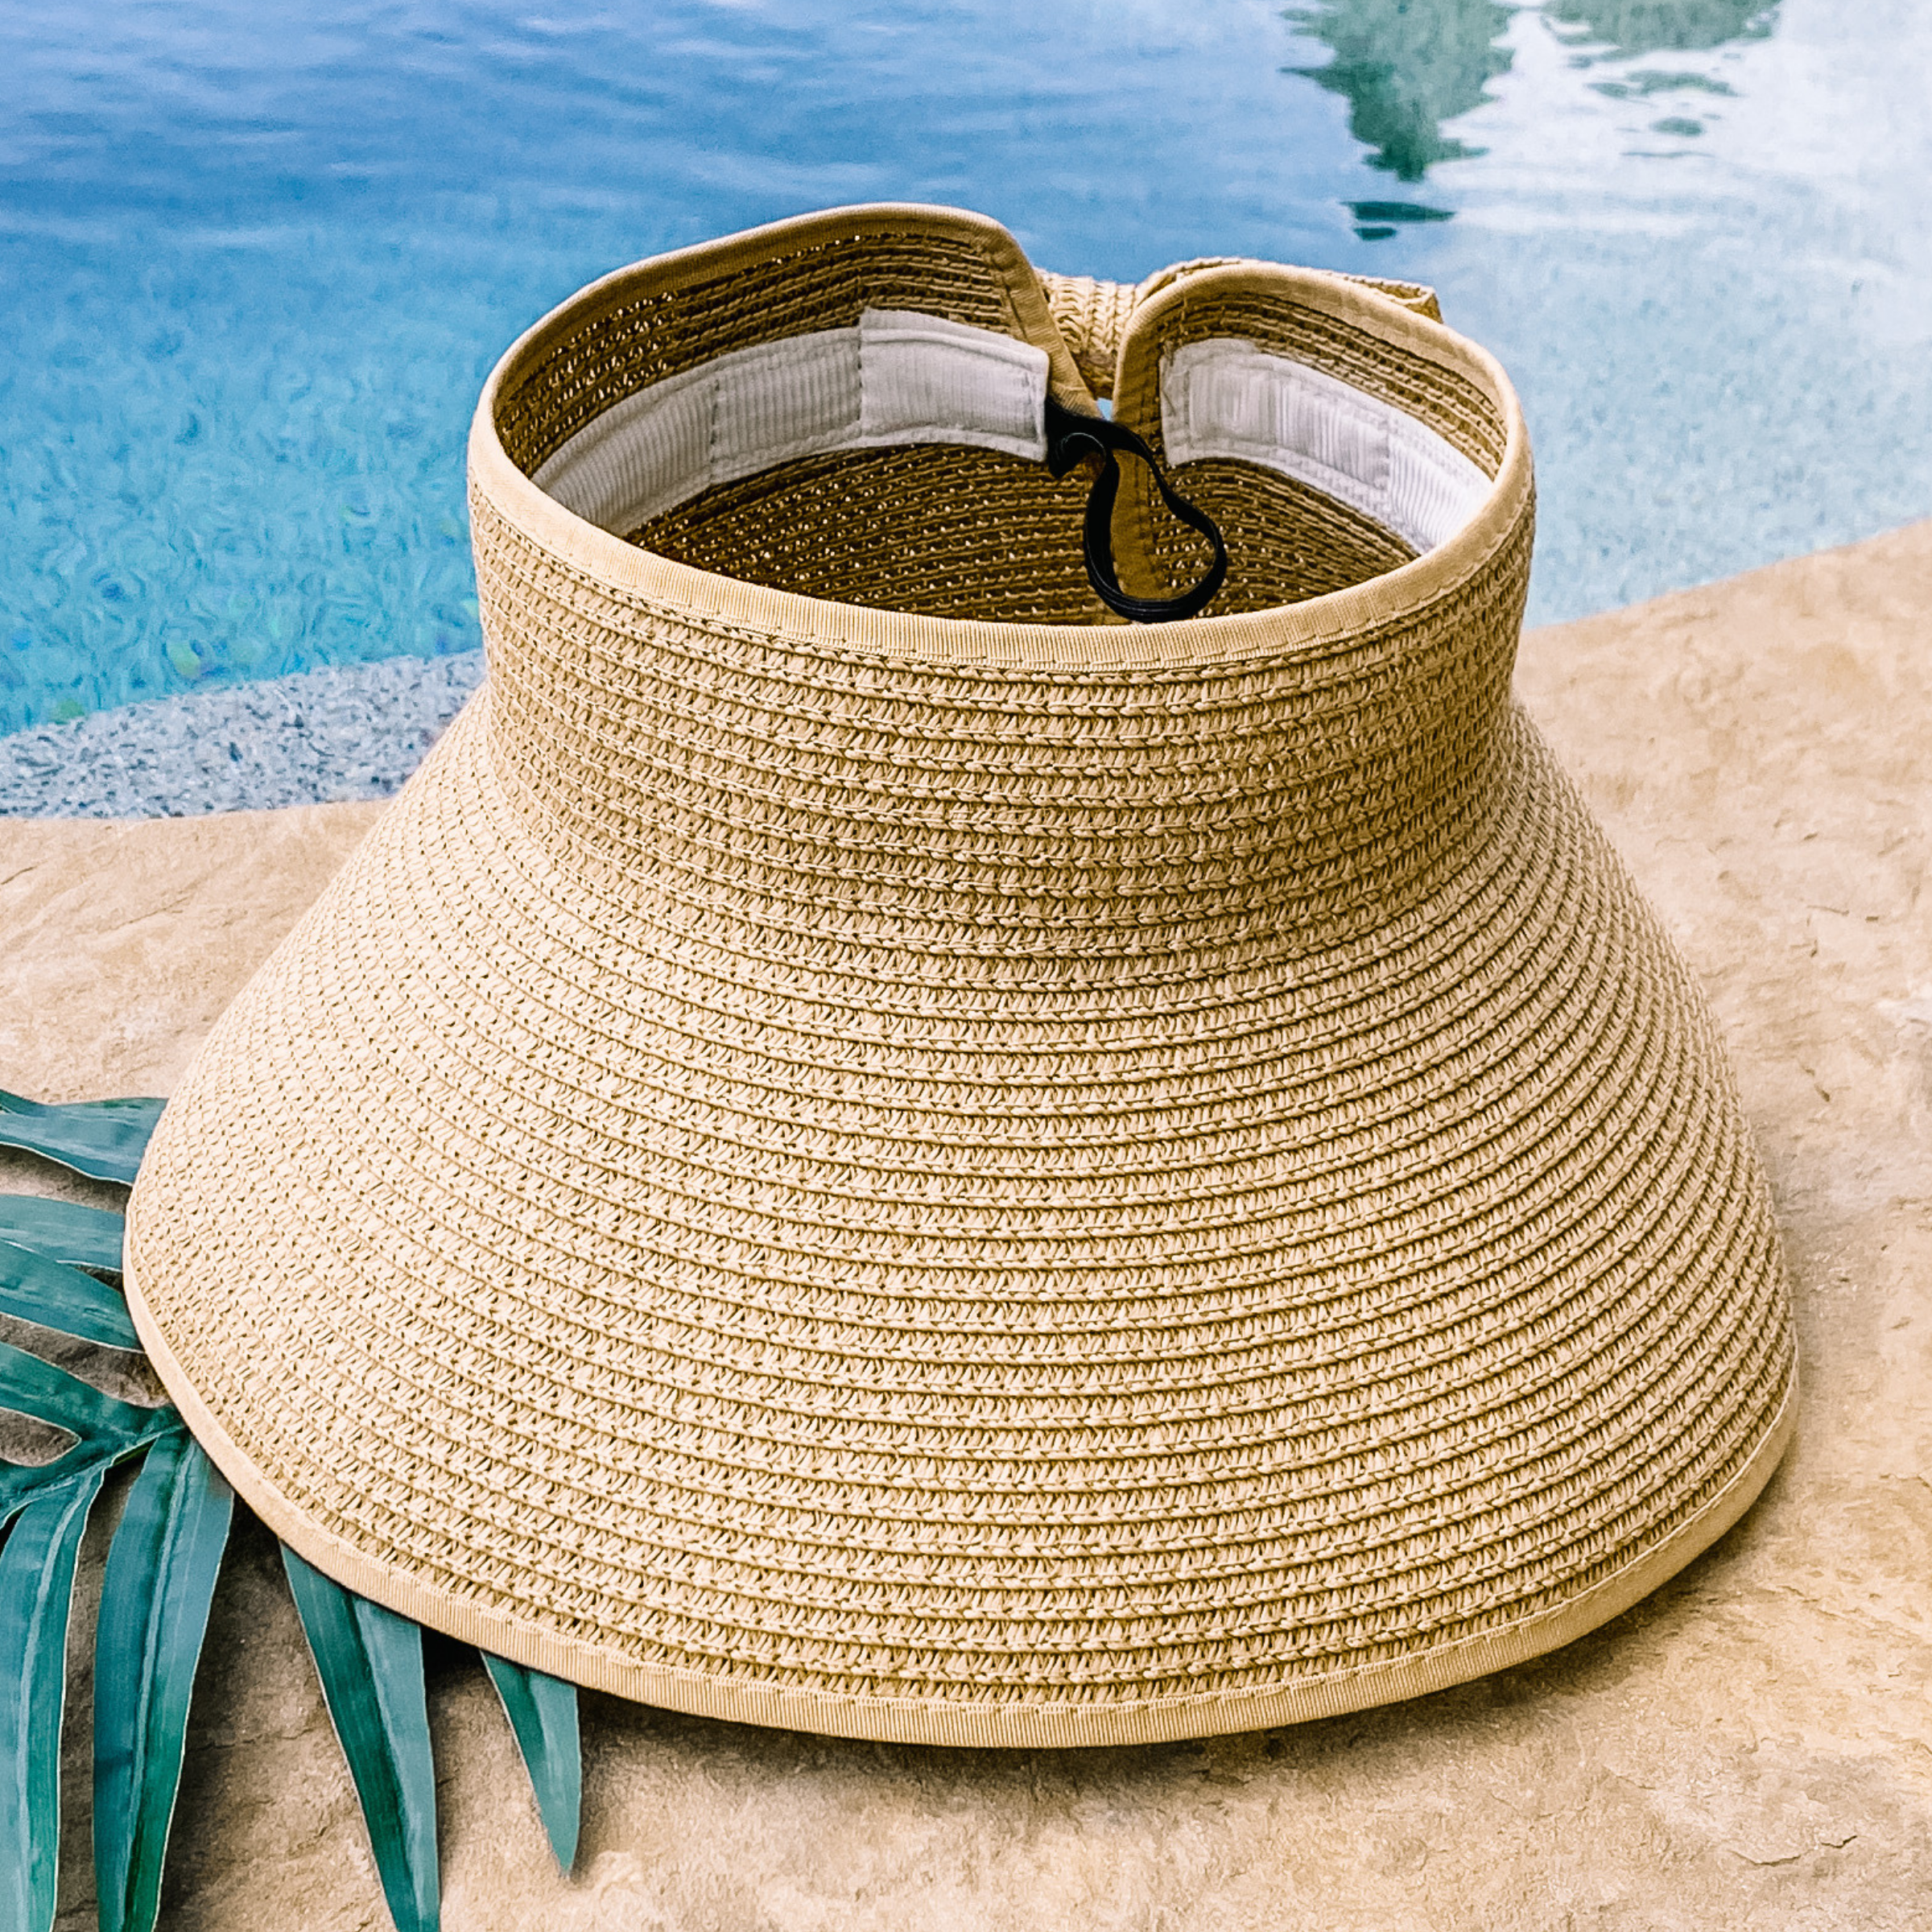 Natural, woven velcro visor that is pictured with a green leaf under it. This visor is pictured on a a tan rock in front of a pool.